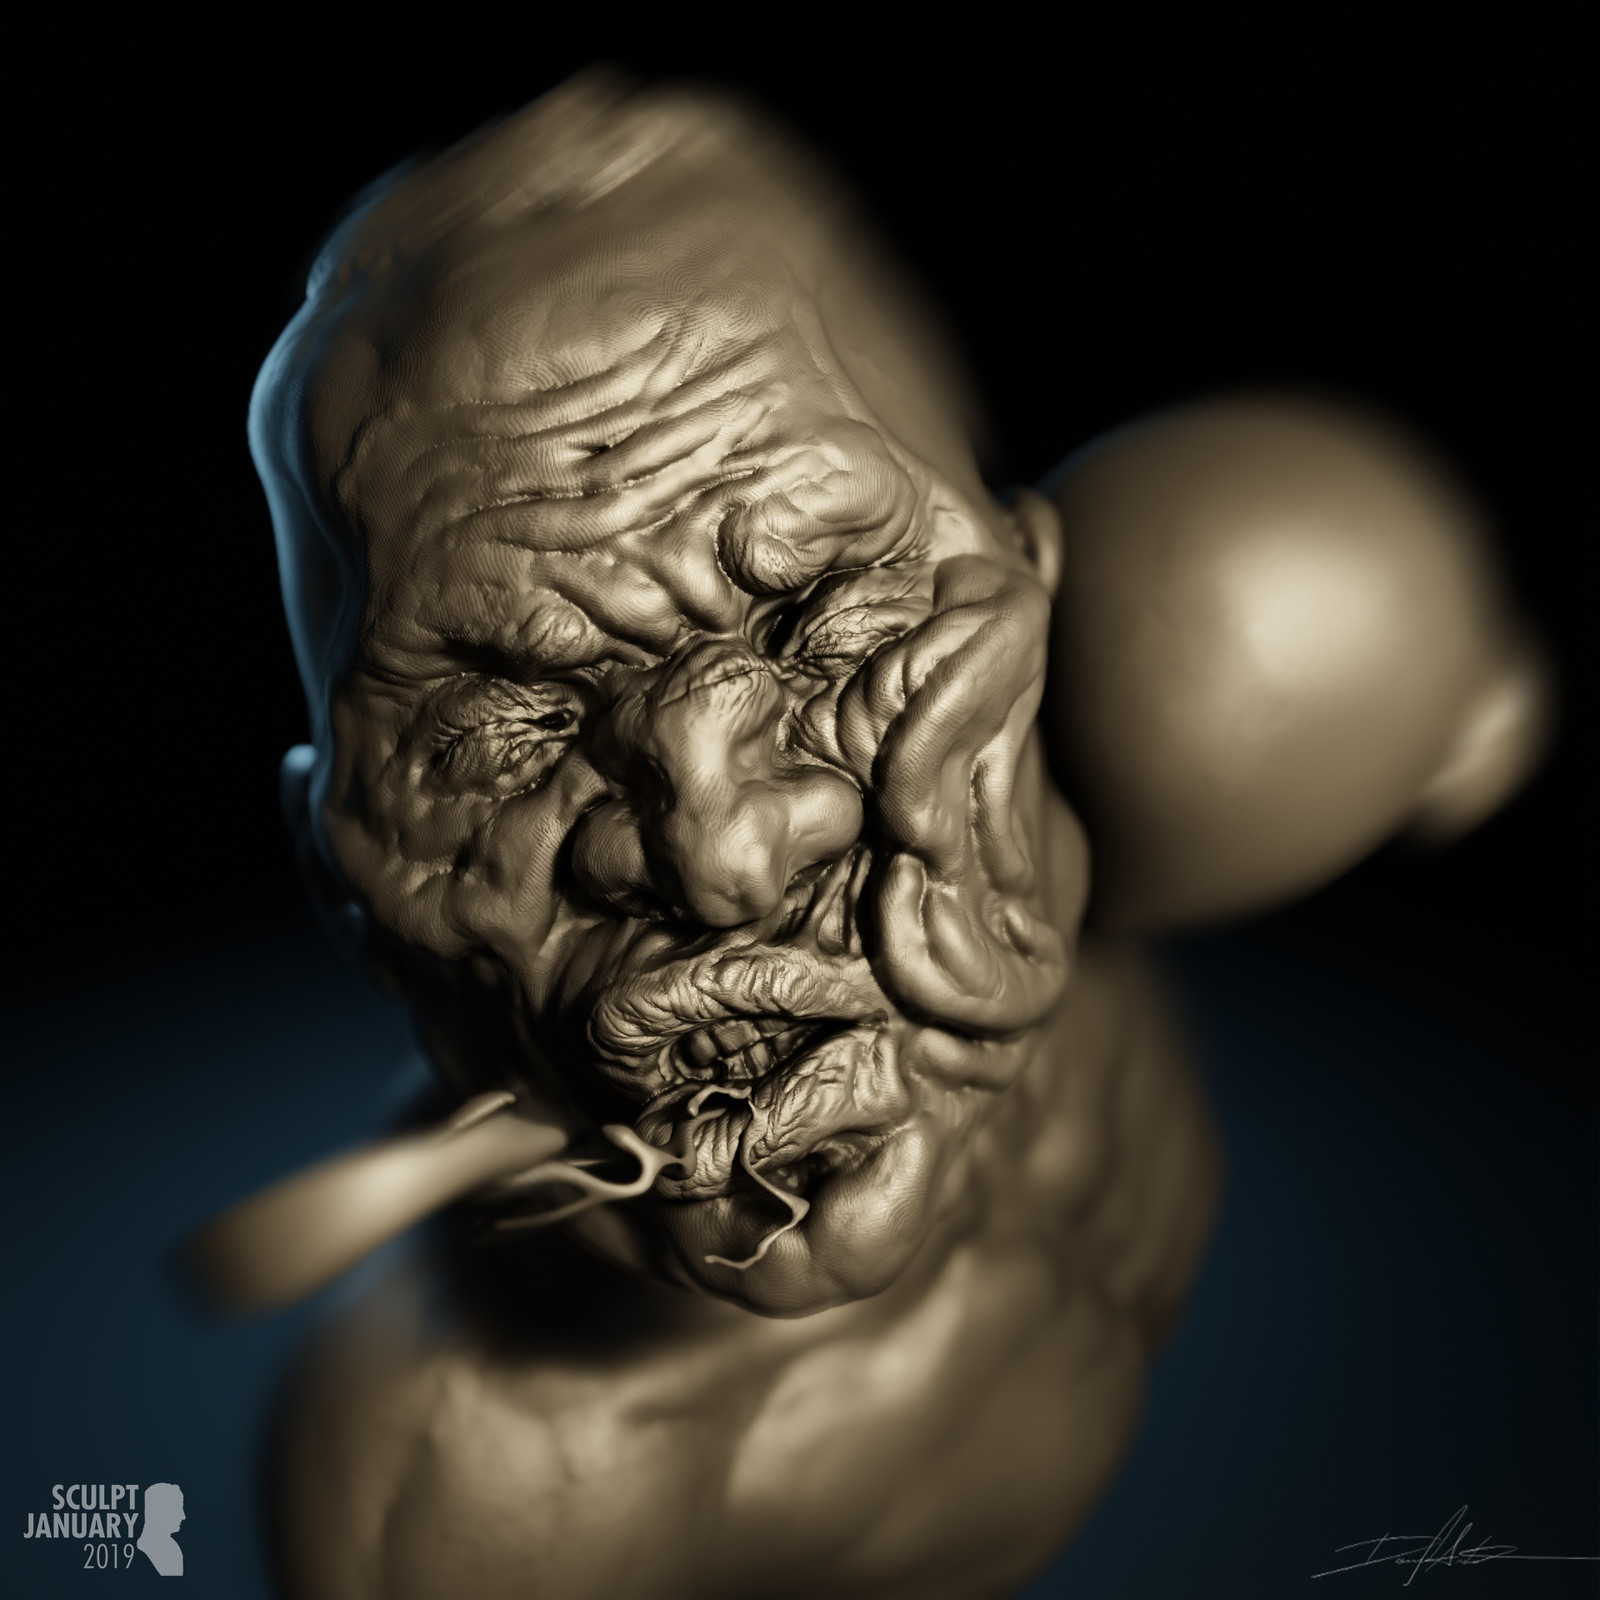 SCULPT JANUARY Day 21 - Pressure (motion)